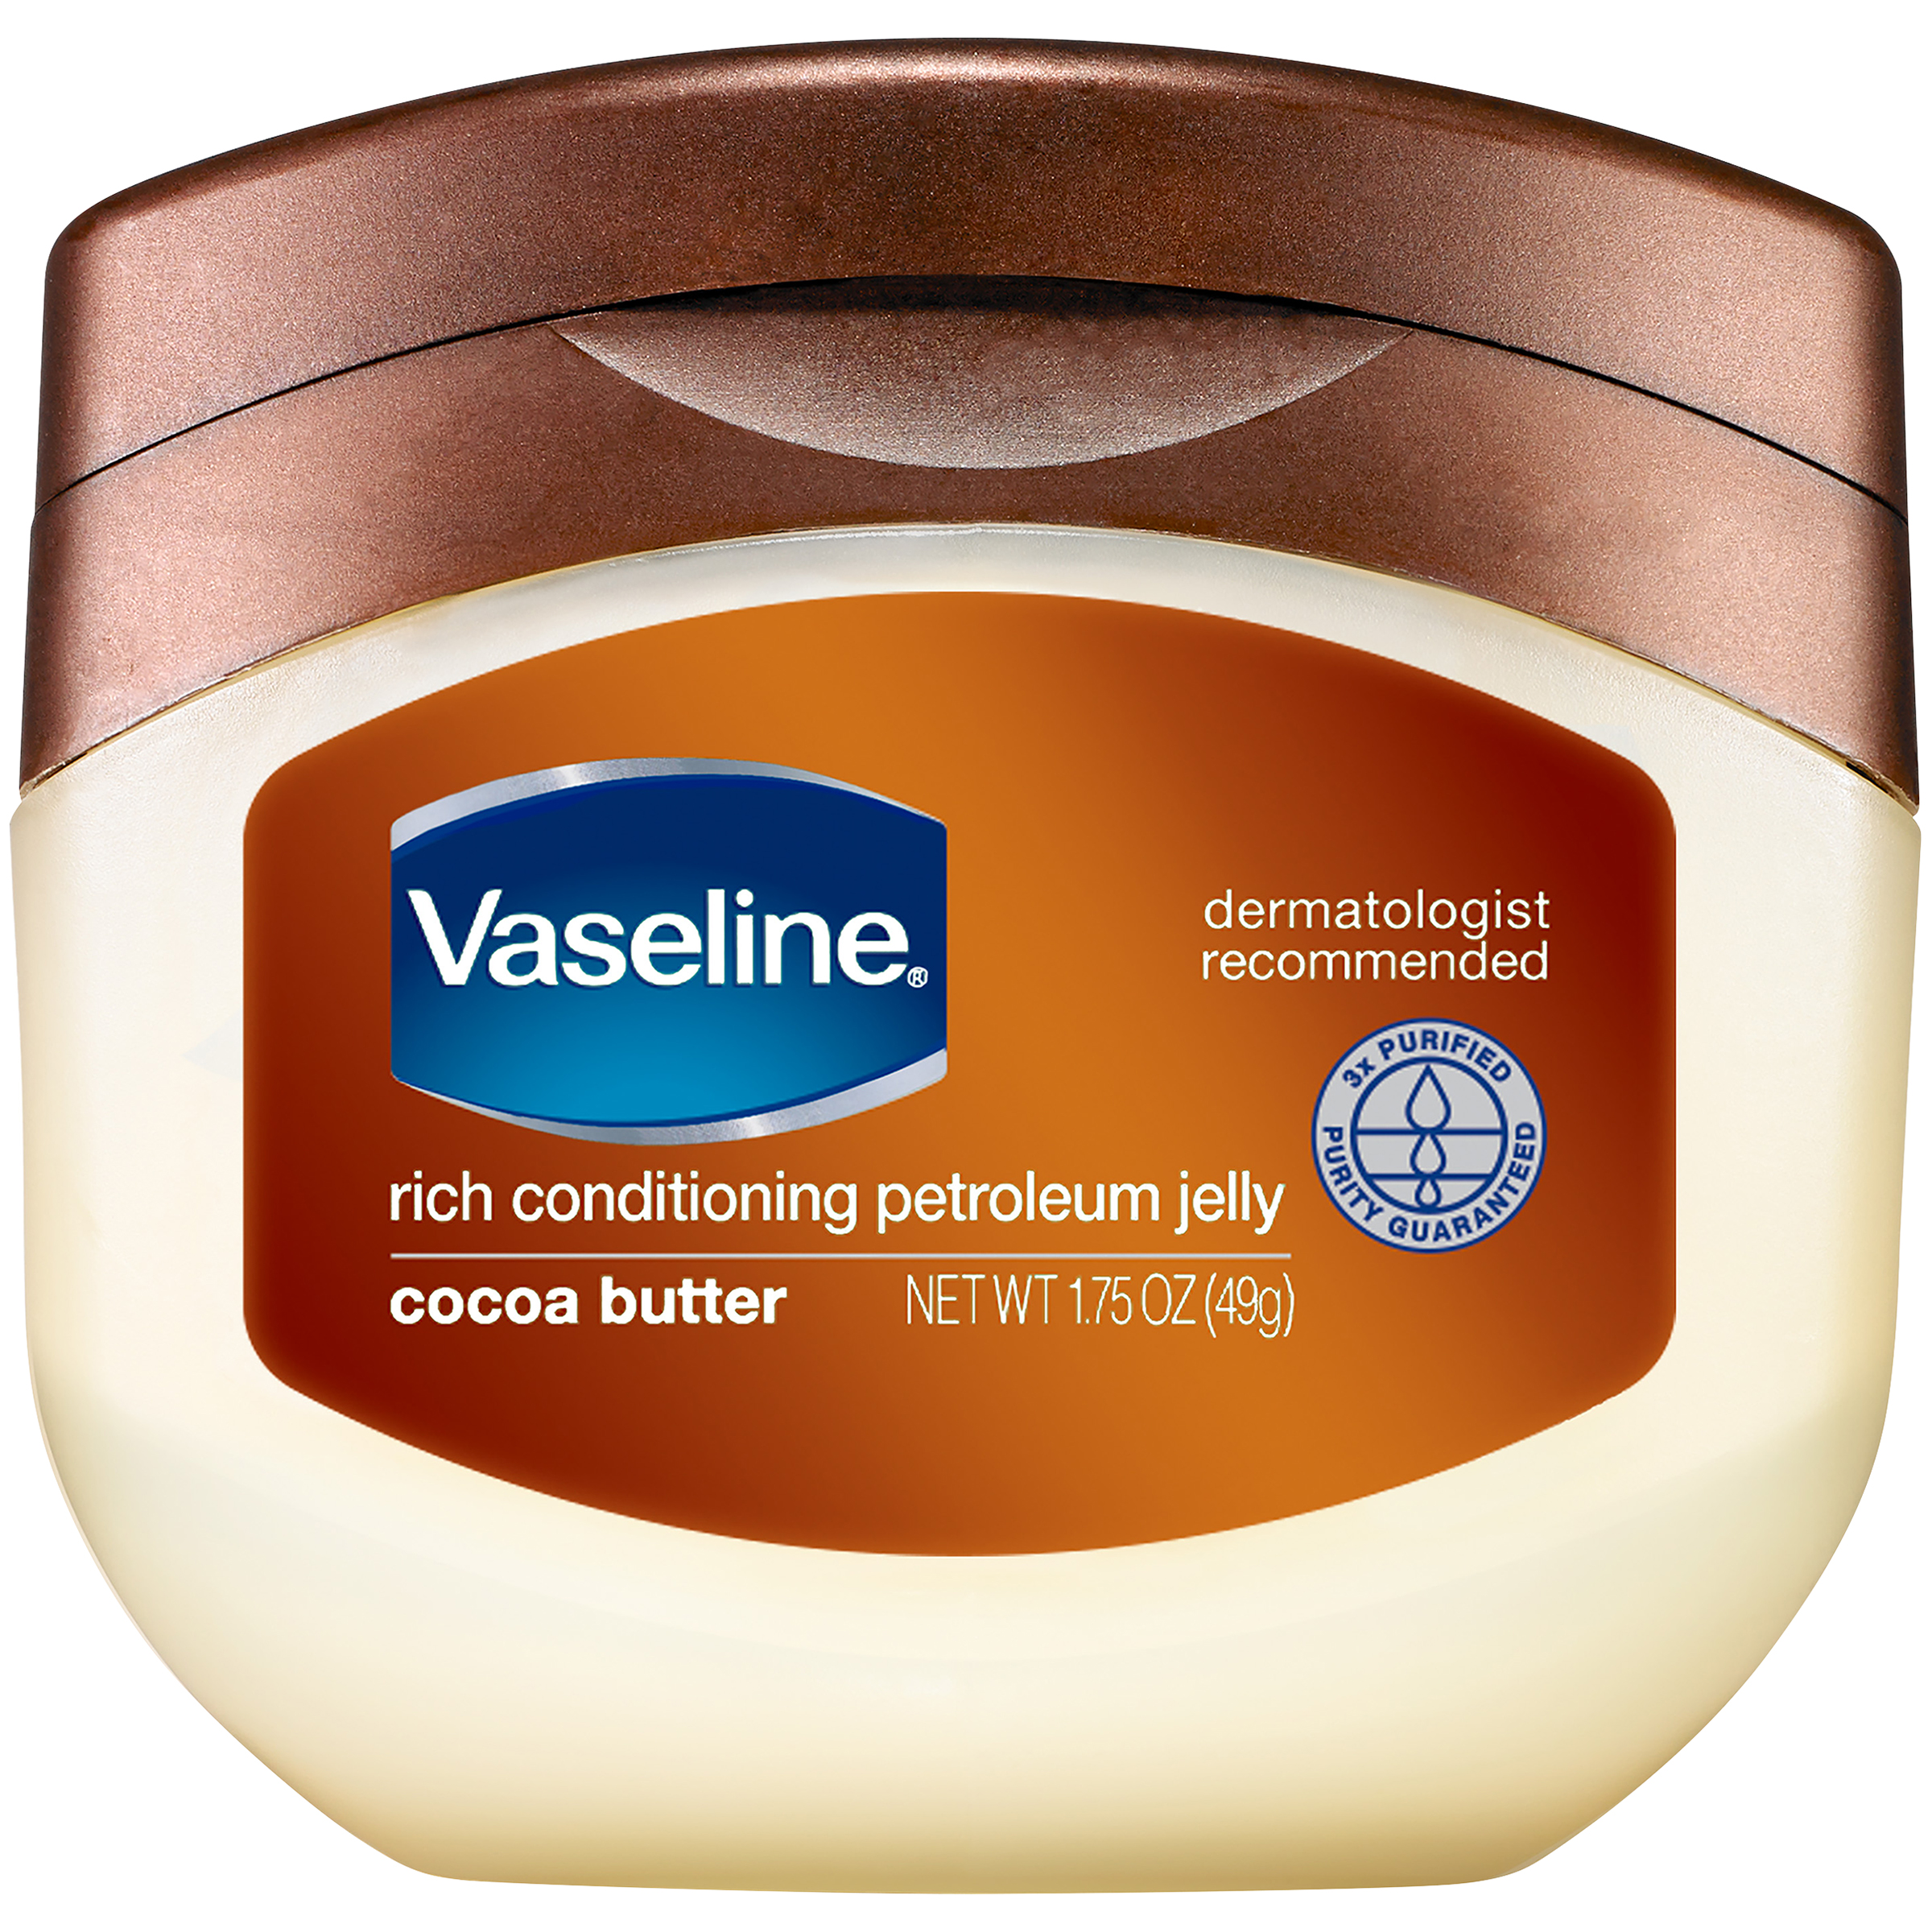 Vaseline Petroleum Jelly, Rich Conditioning, Cocoa Butter7.5 oz (212 g)